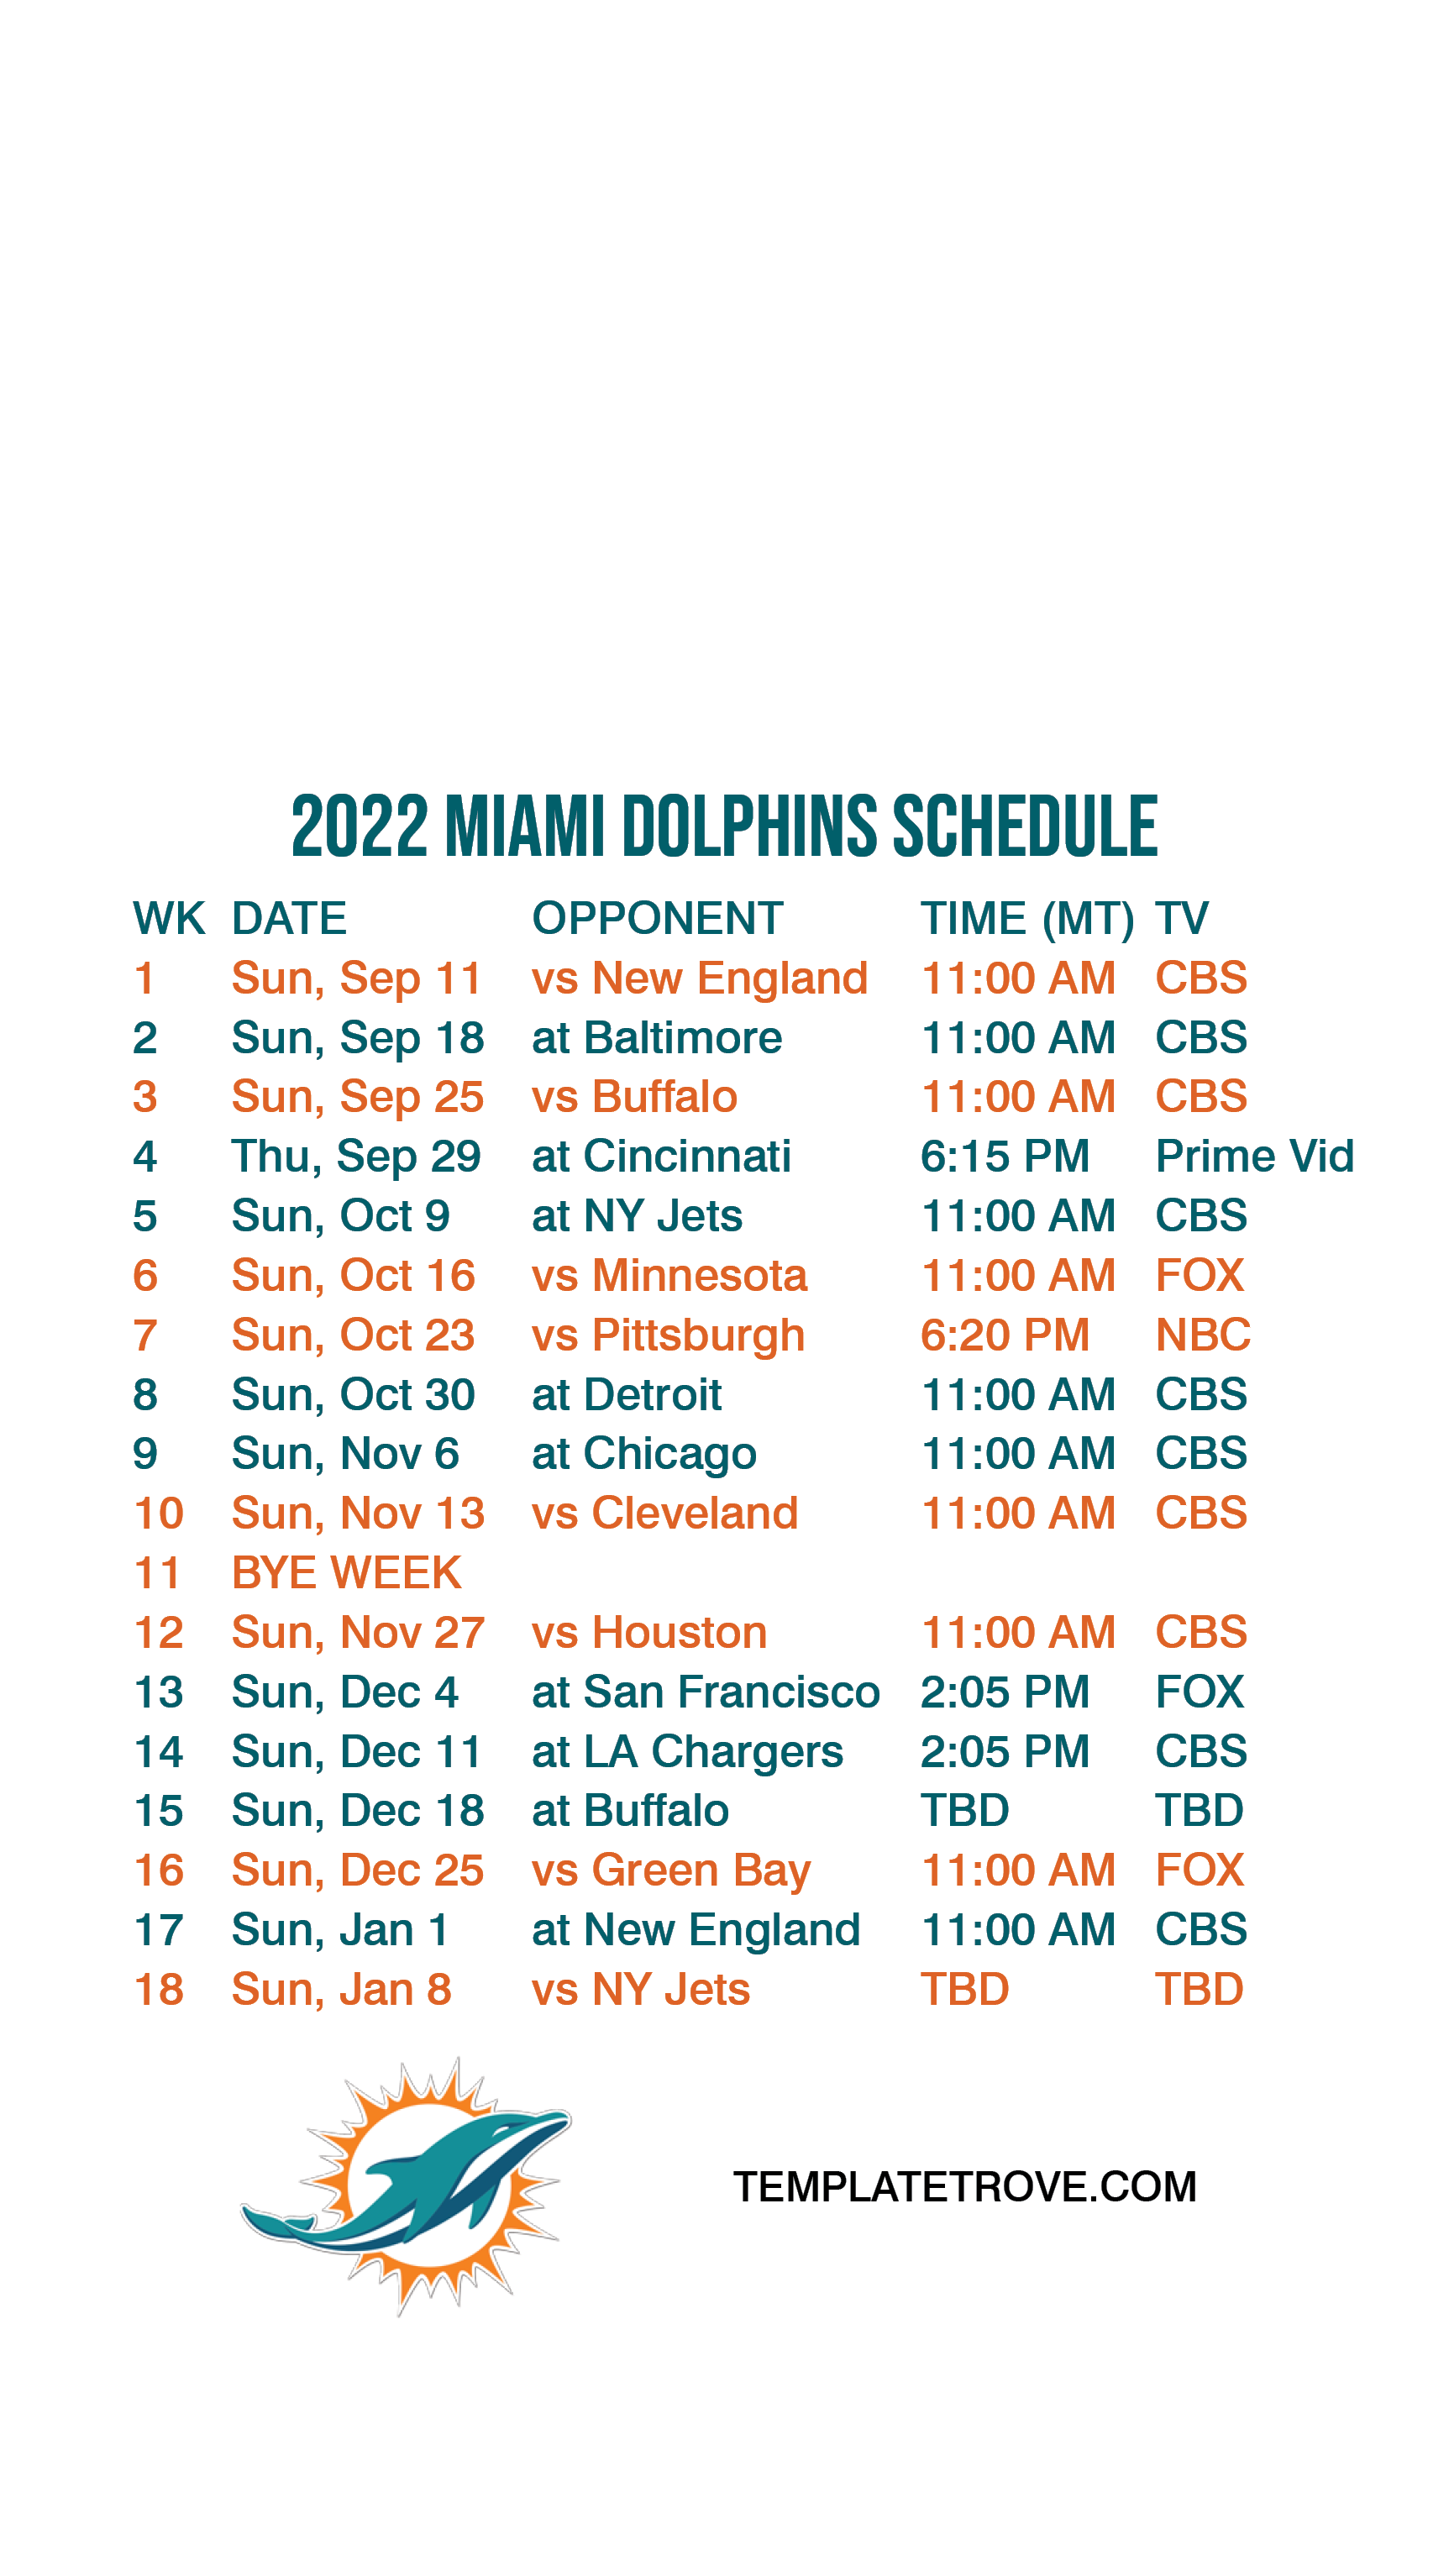 2022-2023 Miami Dolphins Lock Screen Schedule for iPhone 6-7-8 Plus